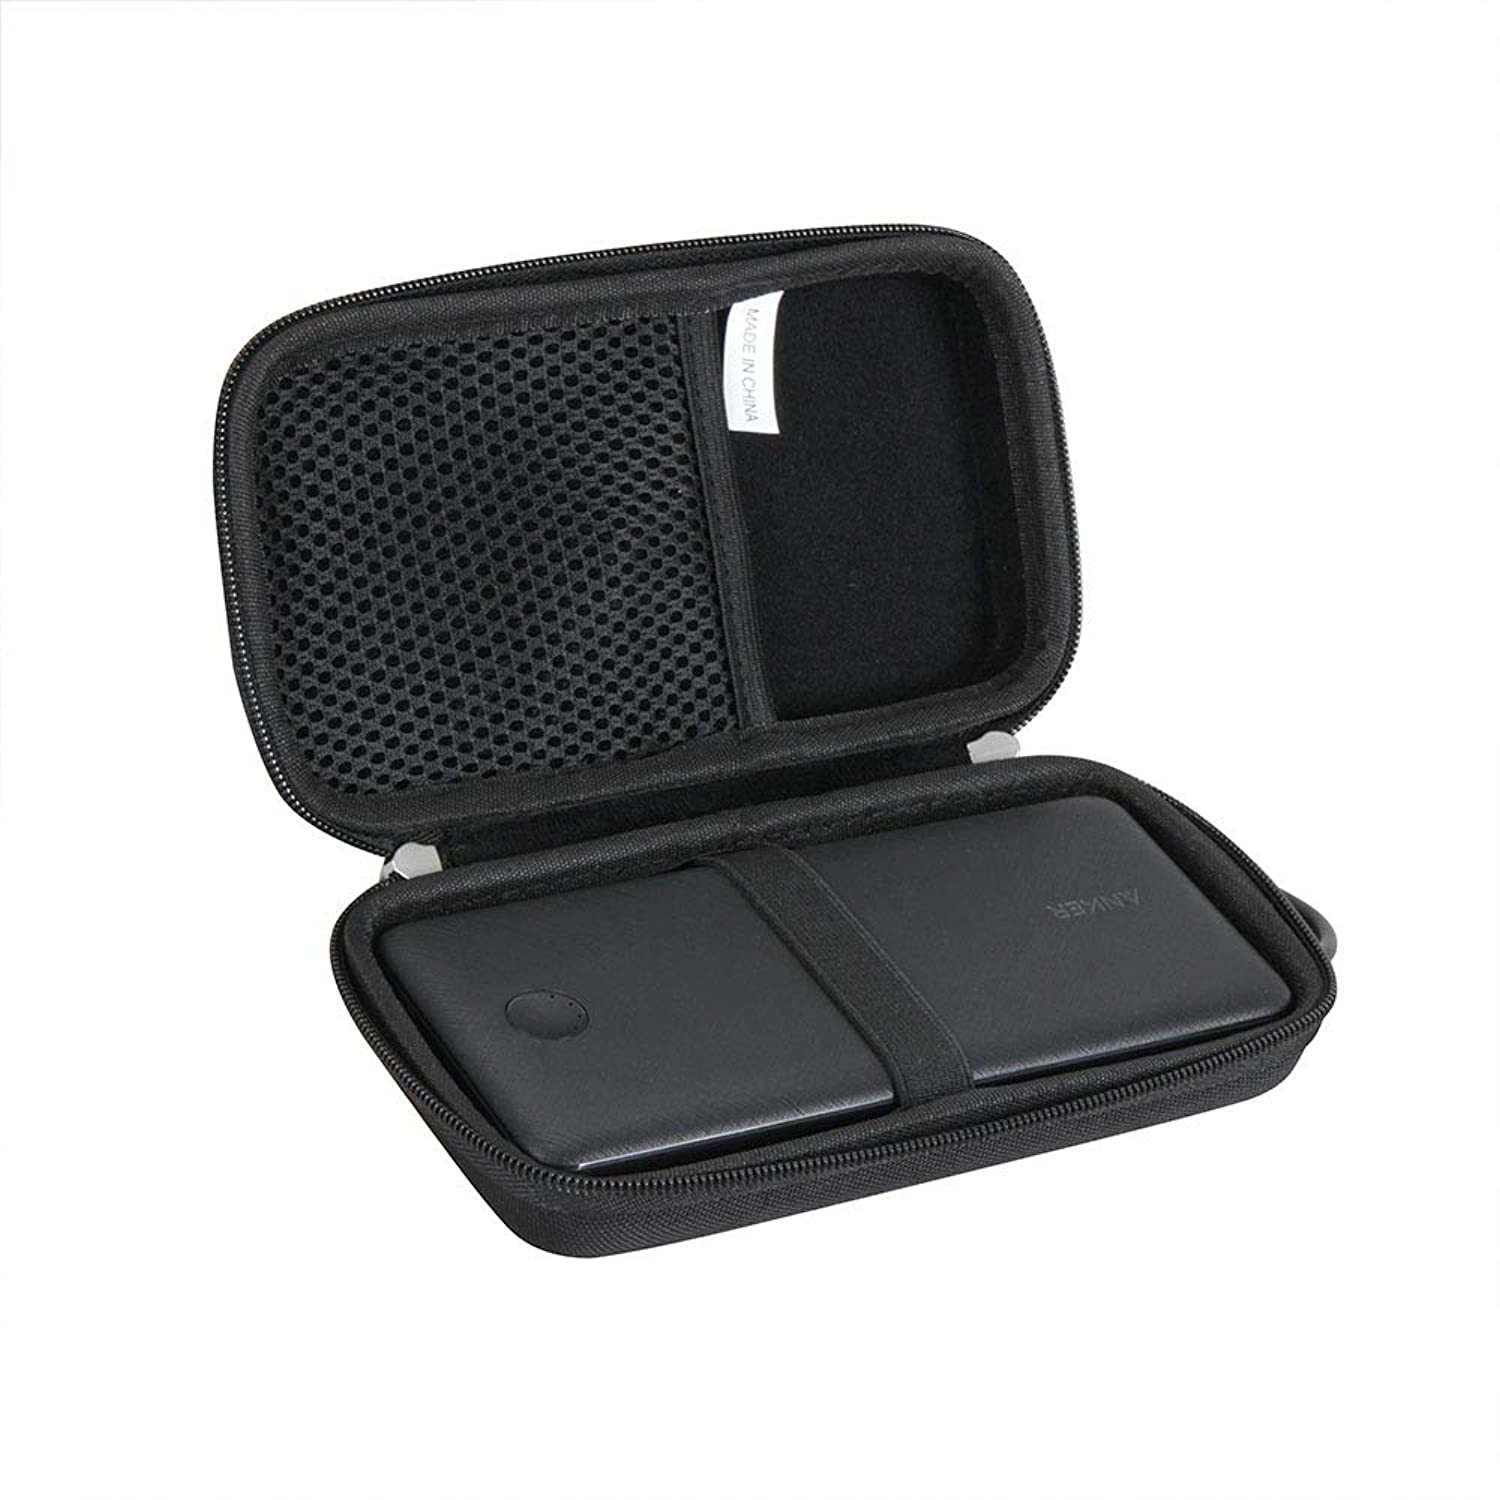 Hermit Hard Case For Anker Powercore Essential 20000 / Anker Powercore - $25.79